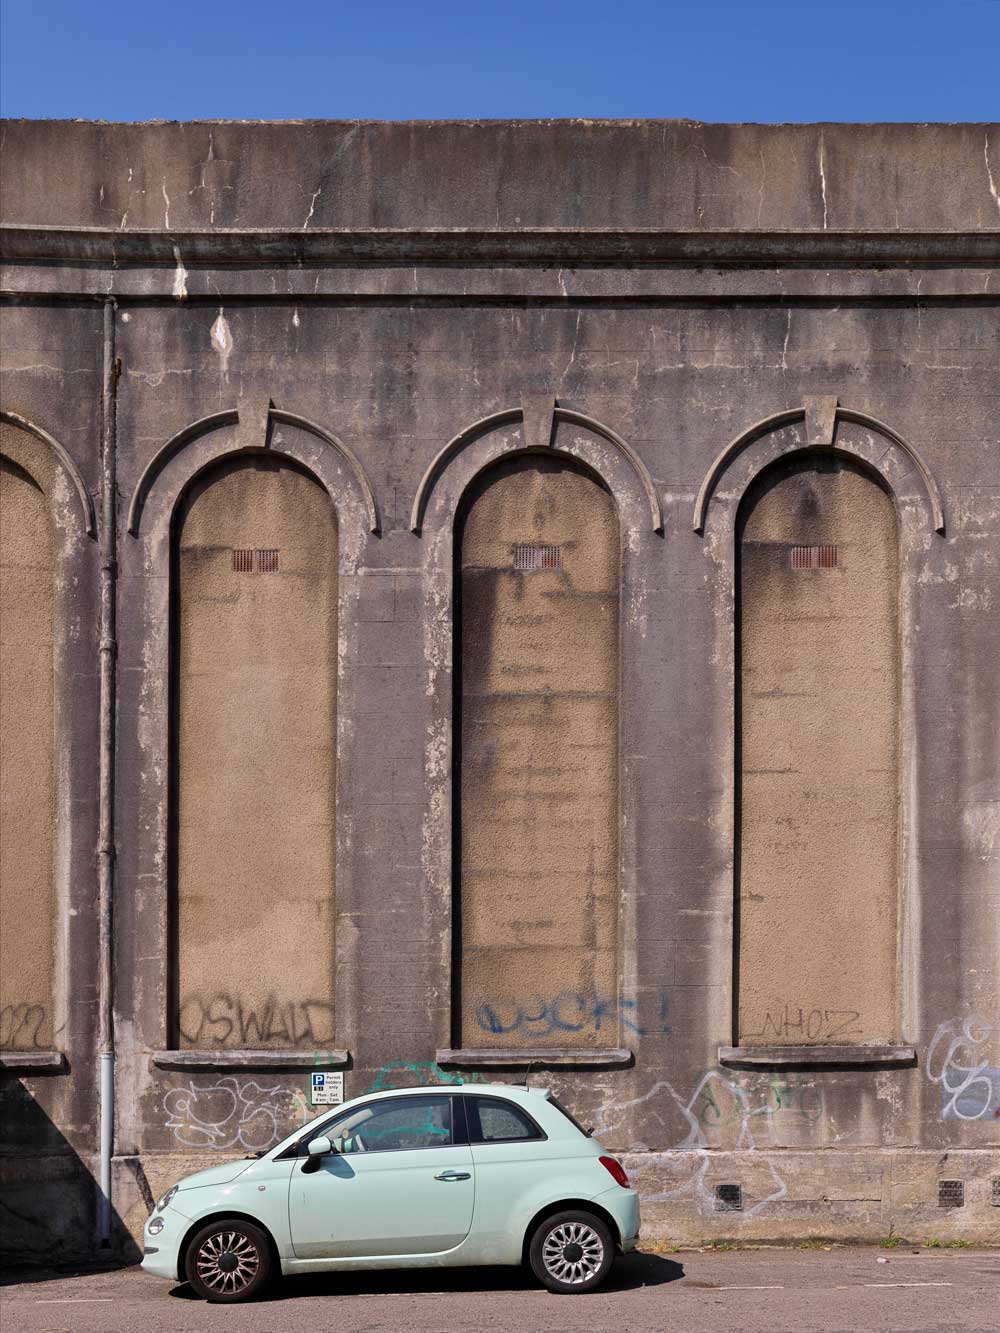 A photograph of a small car parked in front of a large concrete structure with a narrow blind arcade.